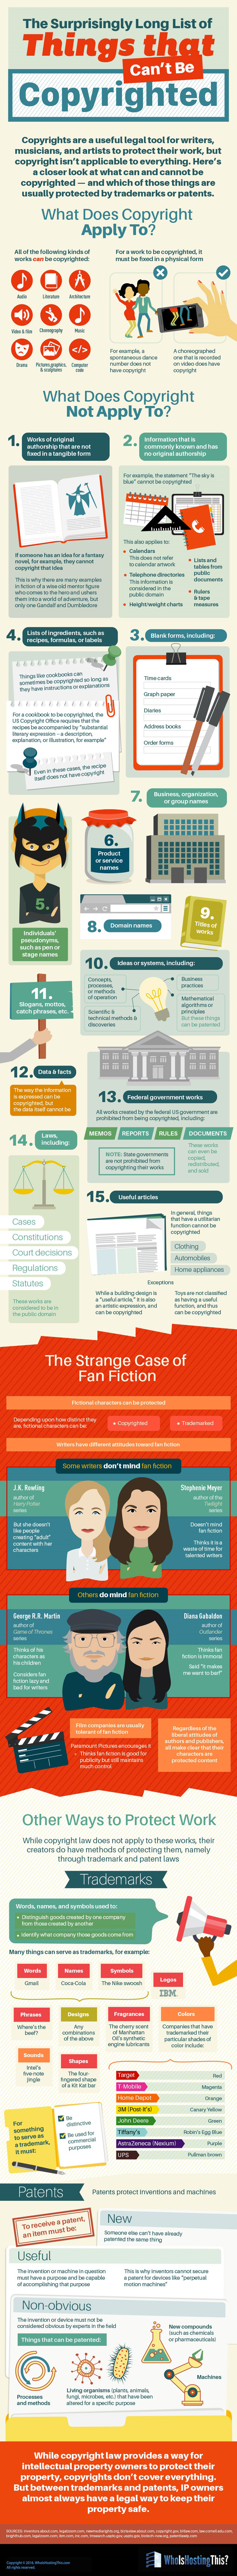 things-that-can-and-cant-be-copyrighted-infographic